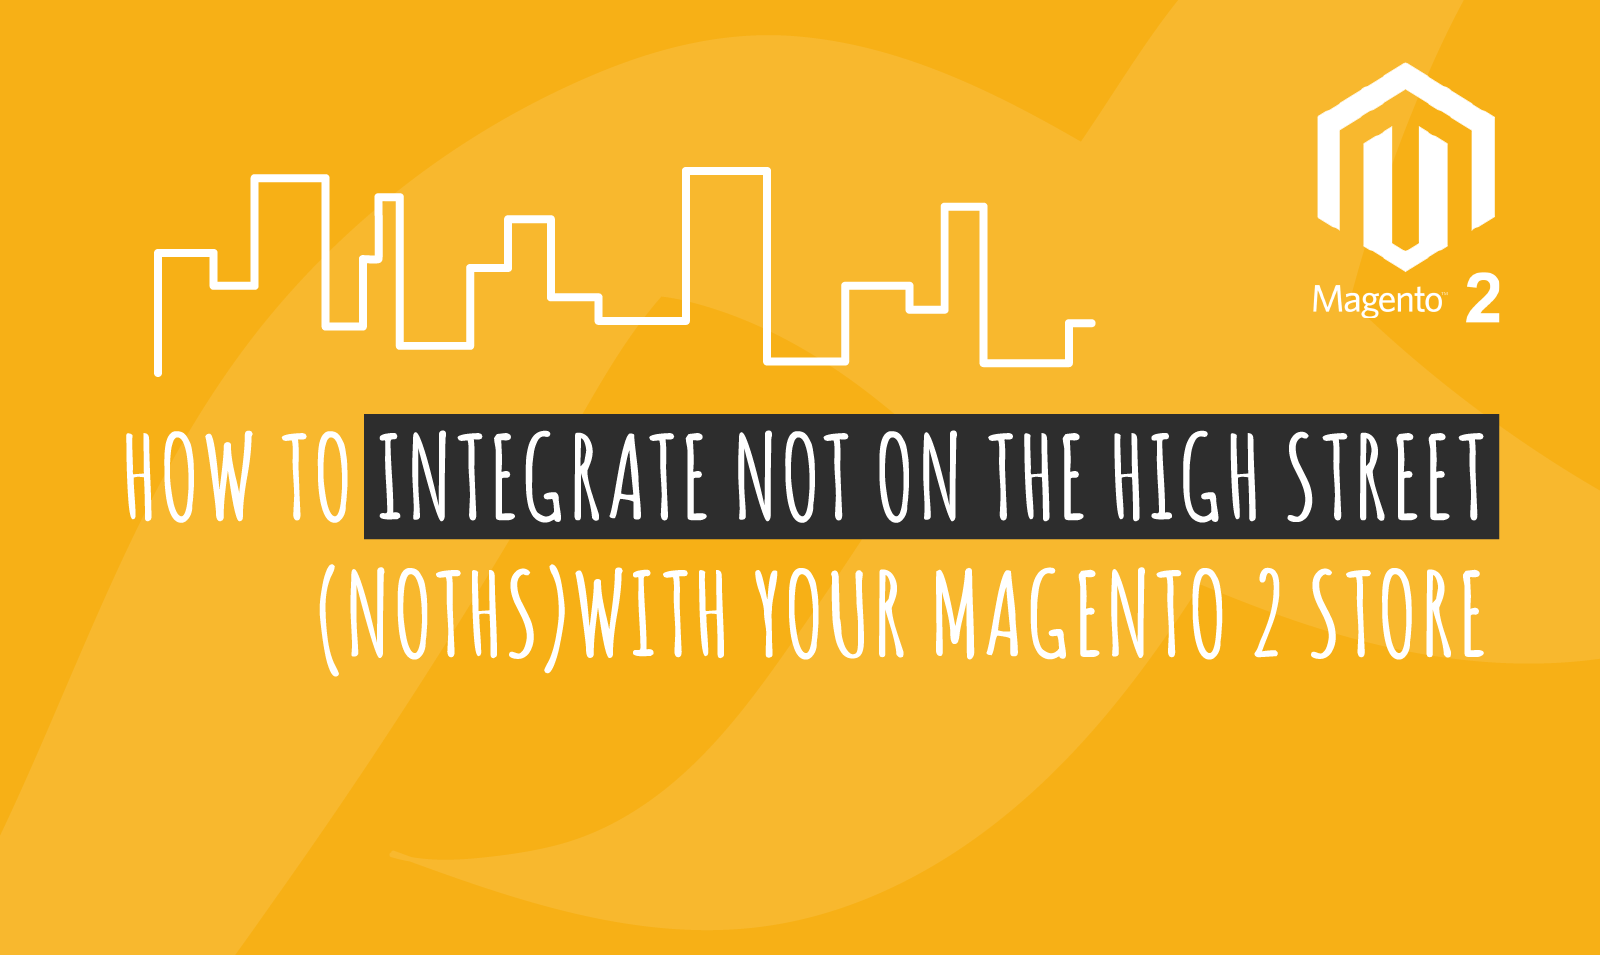 HOW TO INTEGRATE NOT ON THE HIGH STREET(NOTHS) WITH YOUR MAGENTO 2 STORE